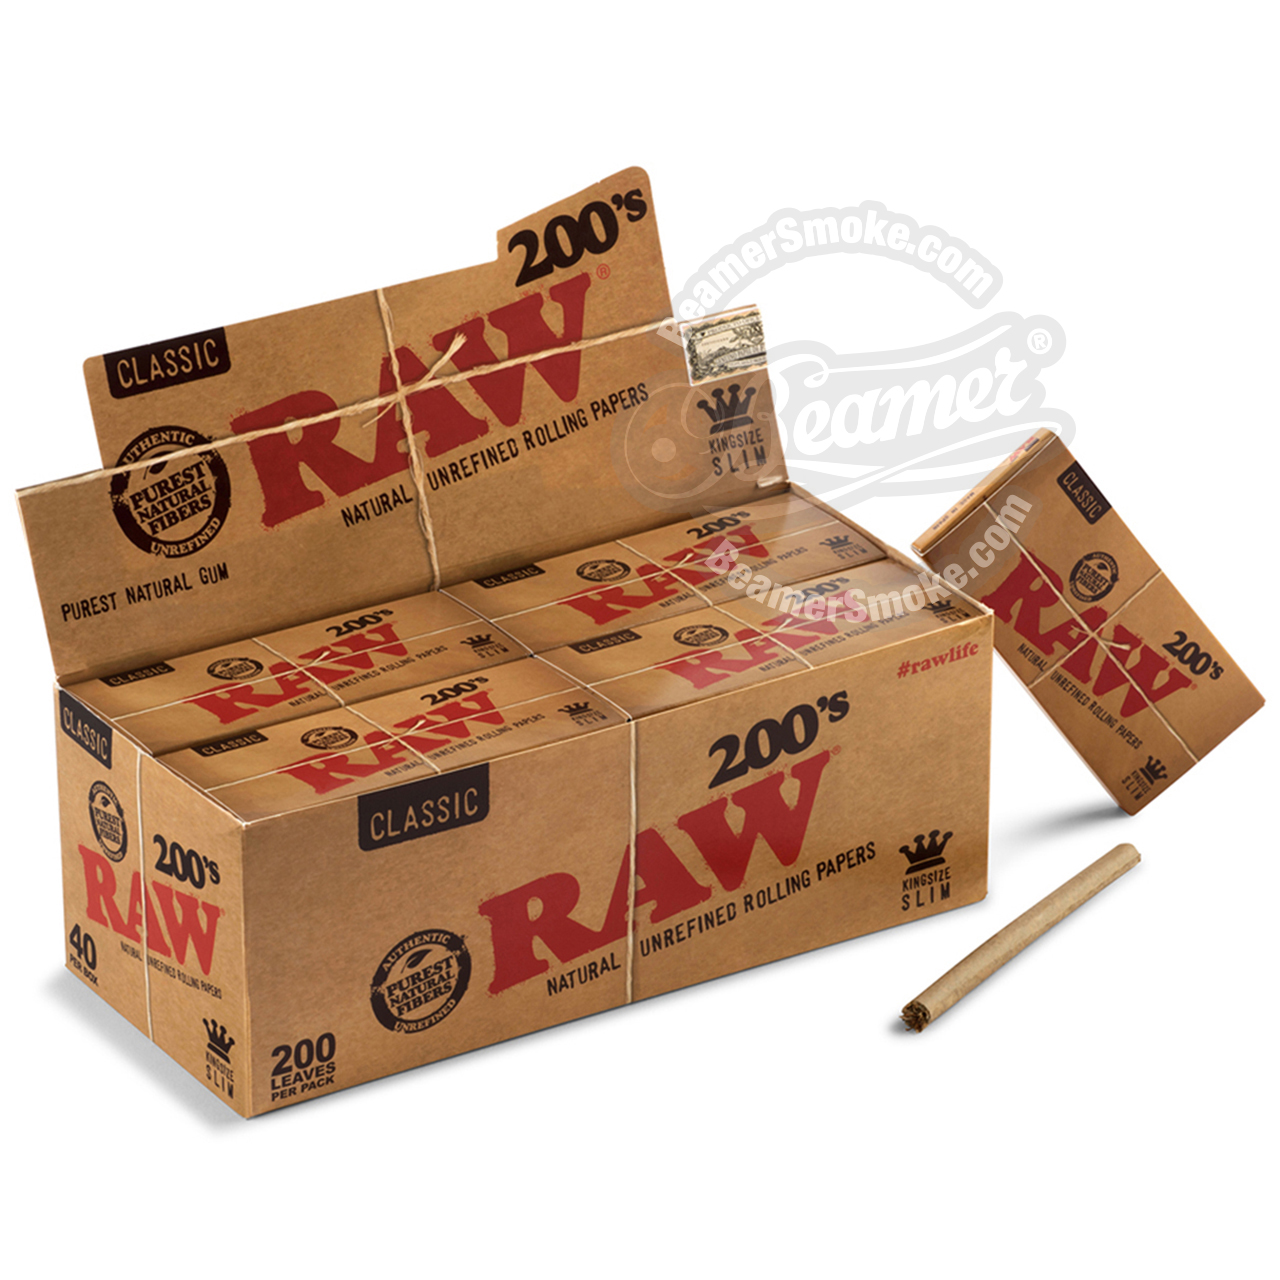 Raw Natural 200's King Size Rolling Papers